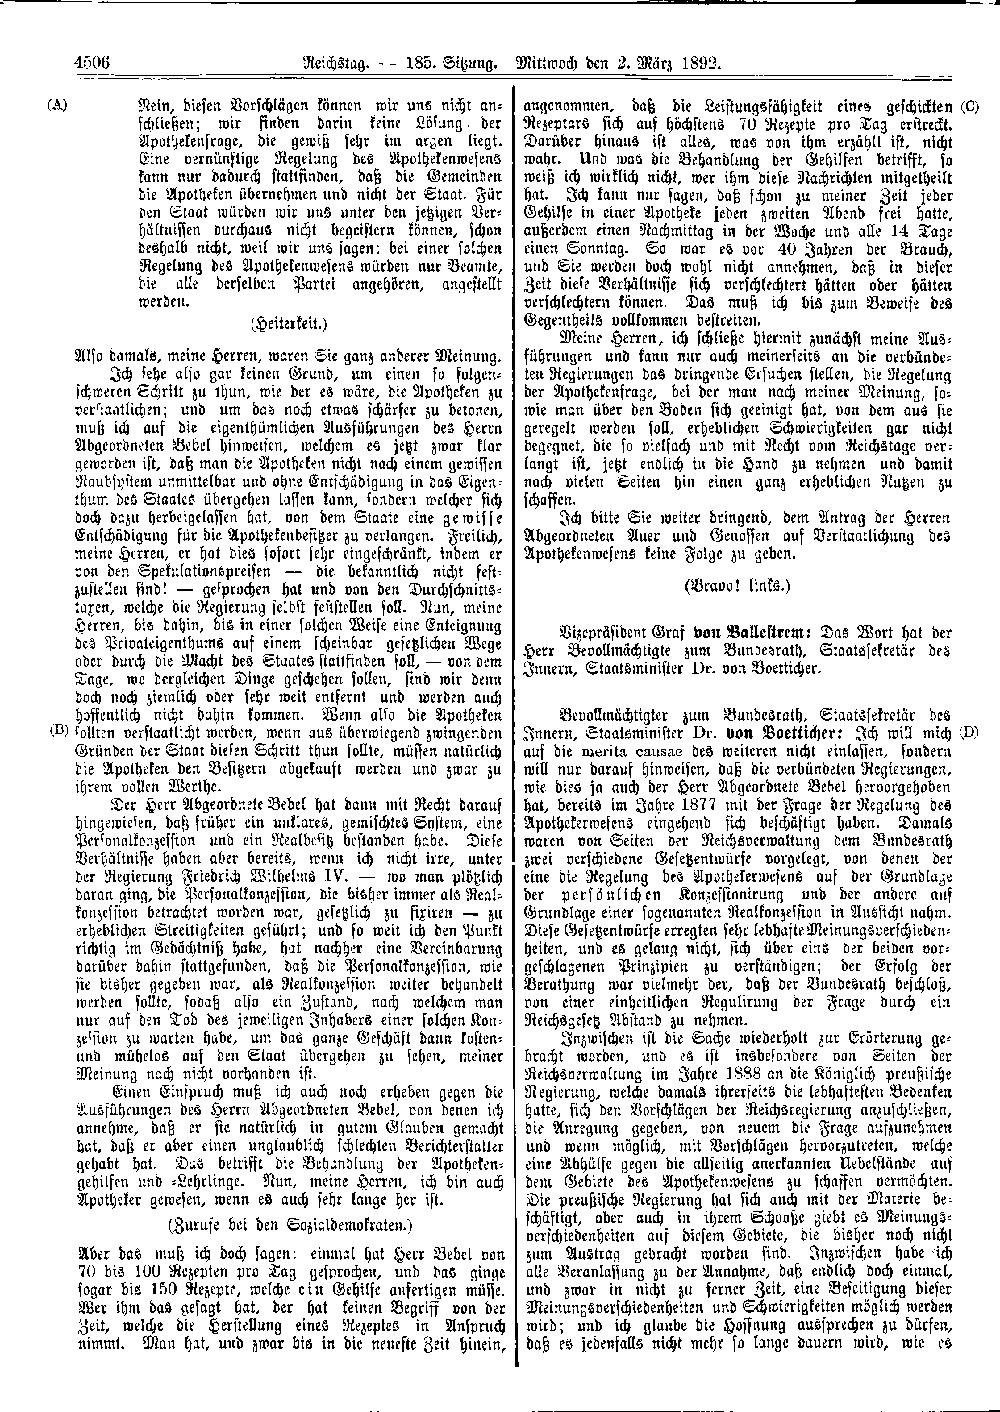 Scan of page 4506